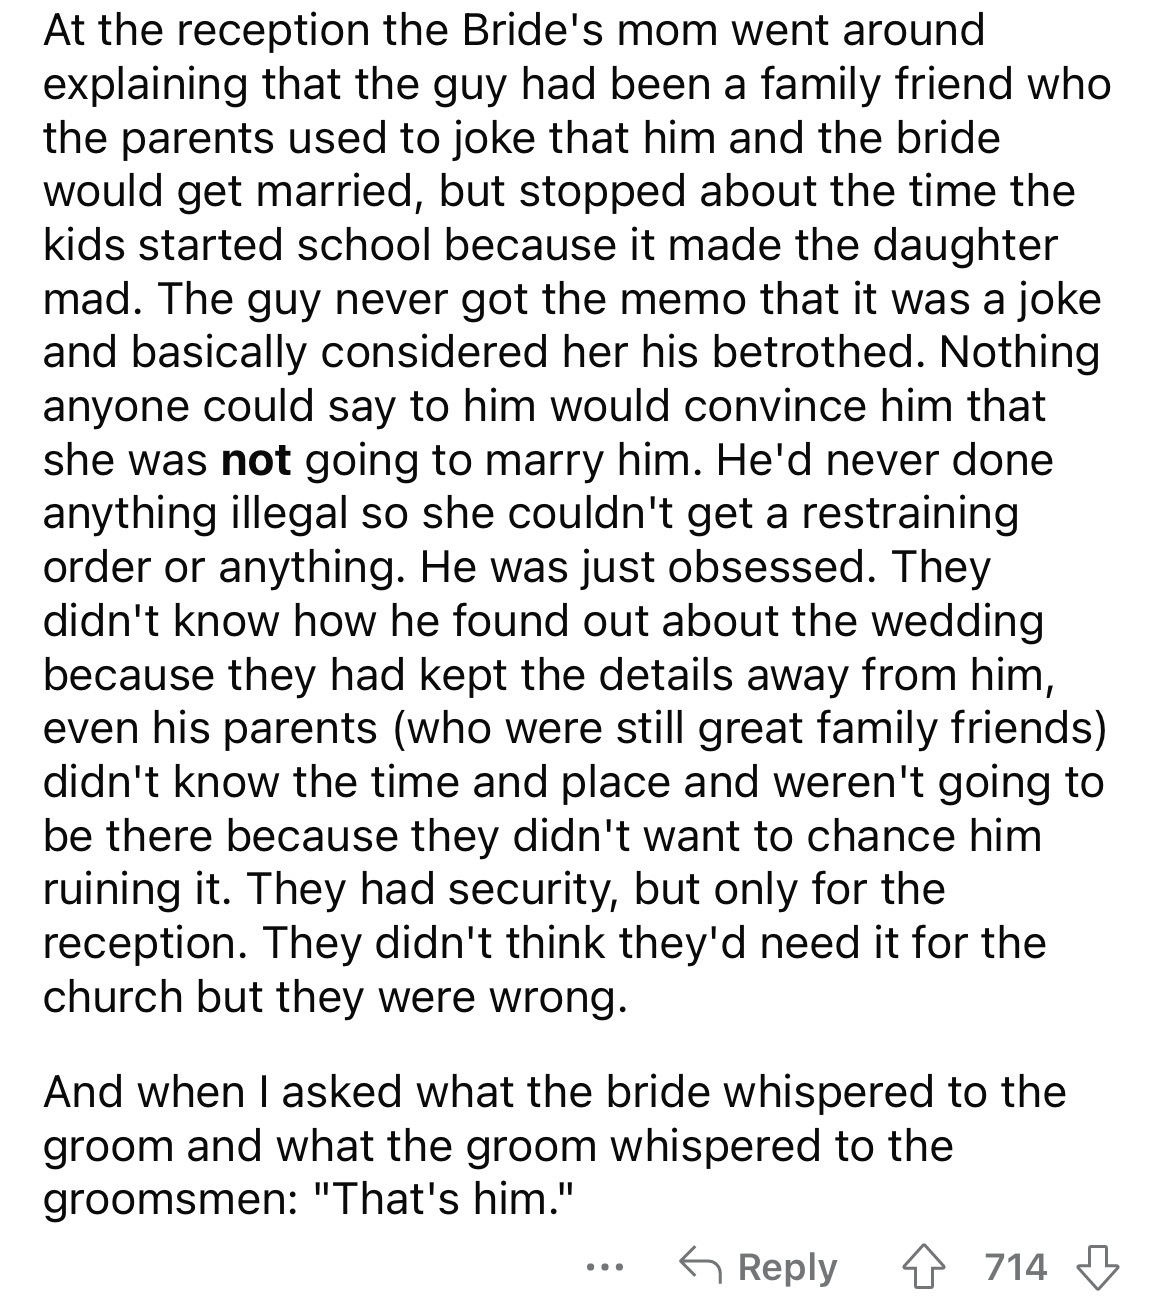 document - At the reception the Bride's mom went around explaining that the guy had been a family friend who the parents used to joke that him and the bride would get married, but stopped about the time the kids started school because it made the daughter